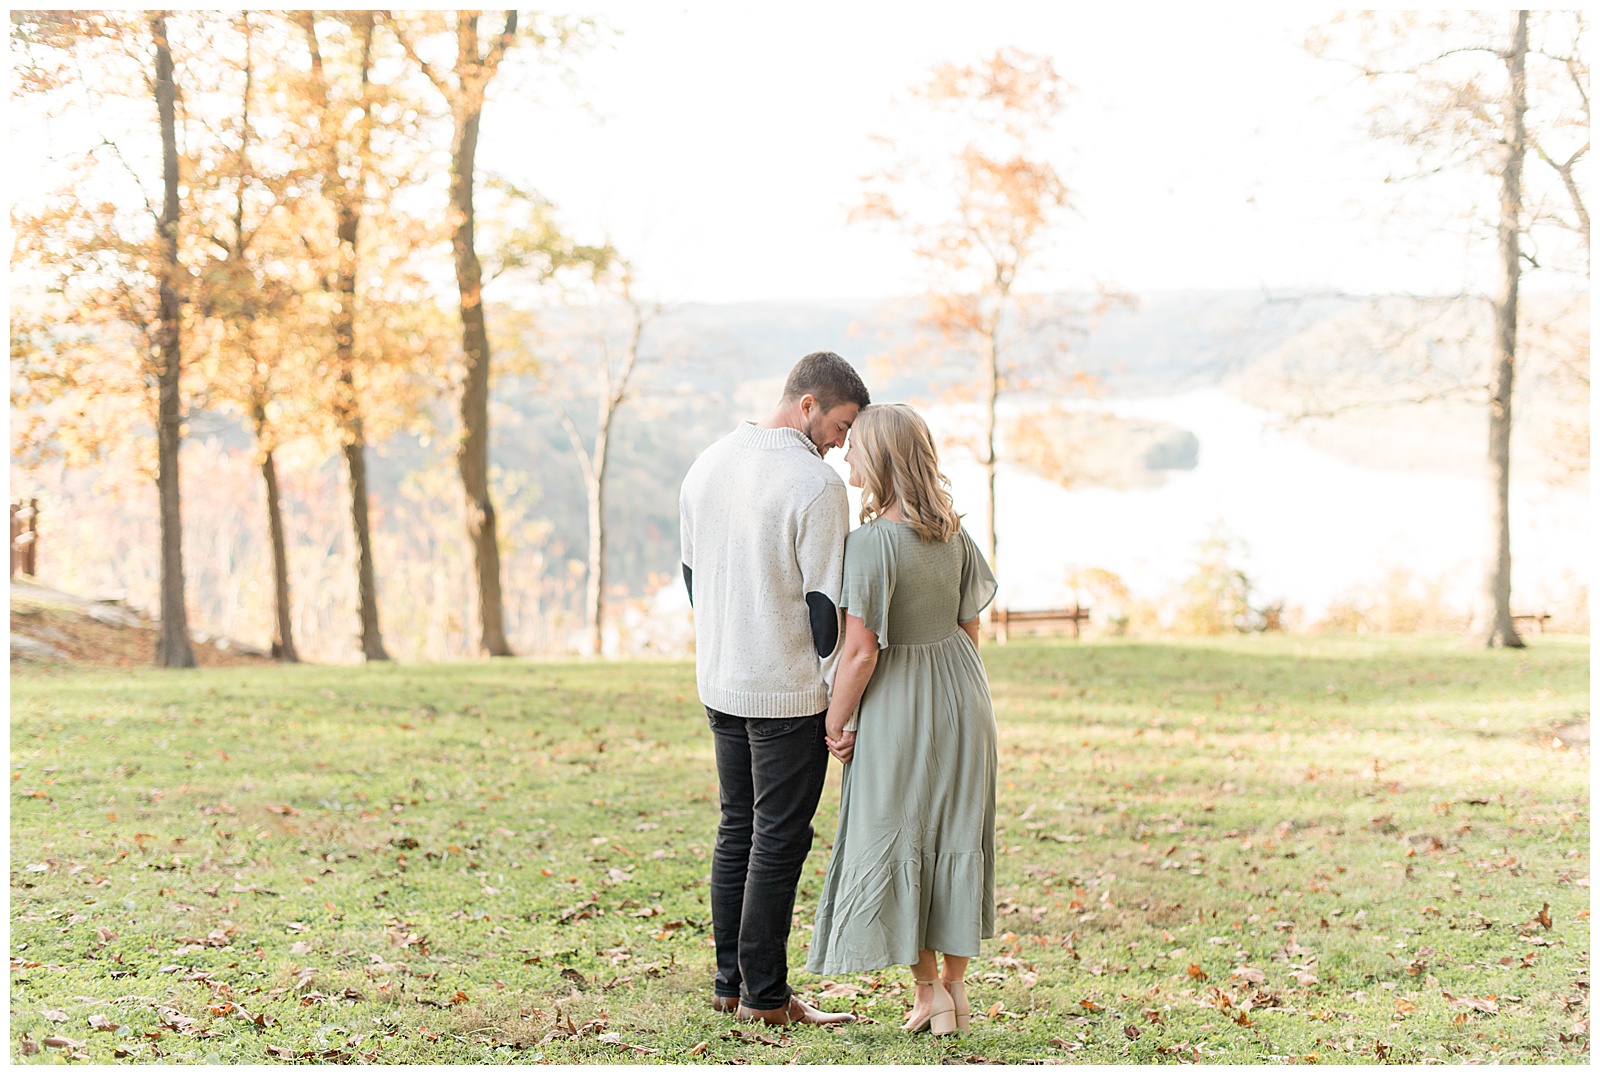 couple with their backs toward camera as they touch foreheads together on sunny fall day with the susquehanna river in the background